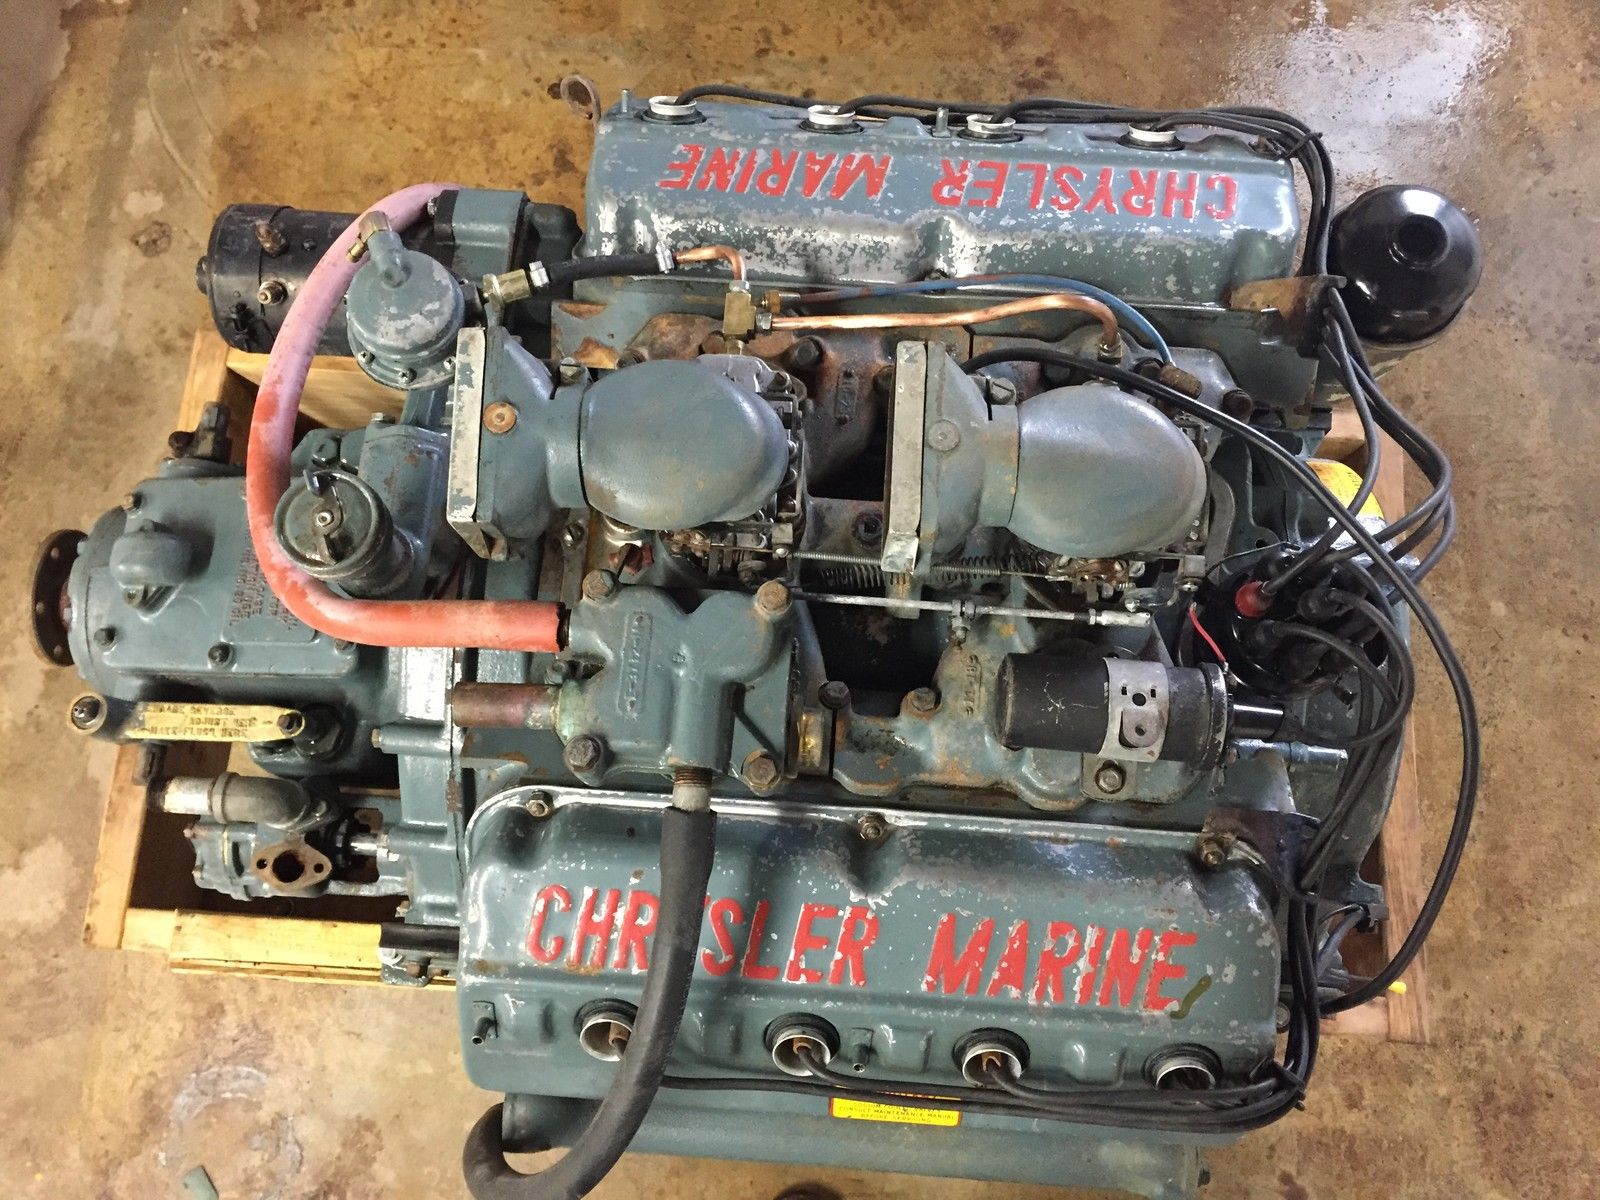 chrysler-331-hemi-1956-for-sale-for-4-000-boats-from-usa